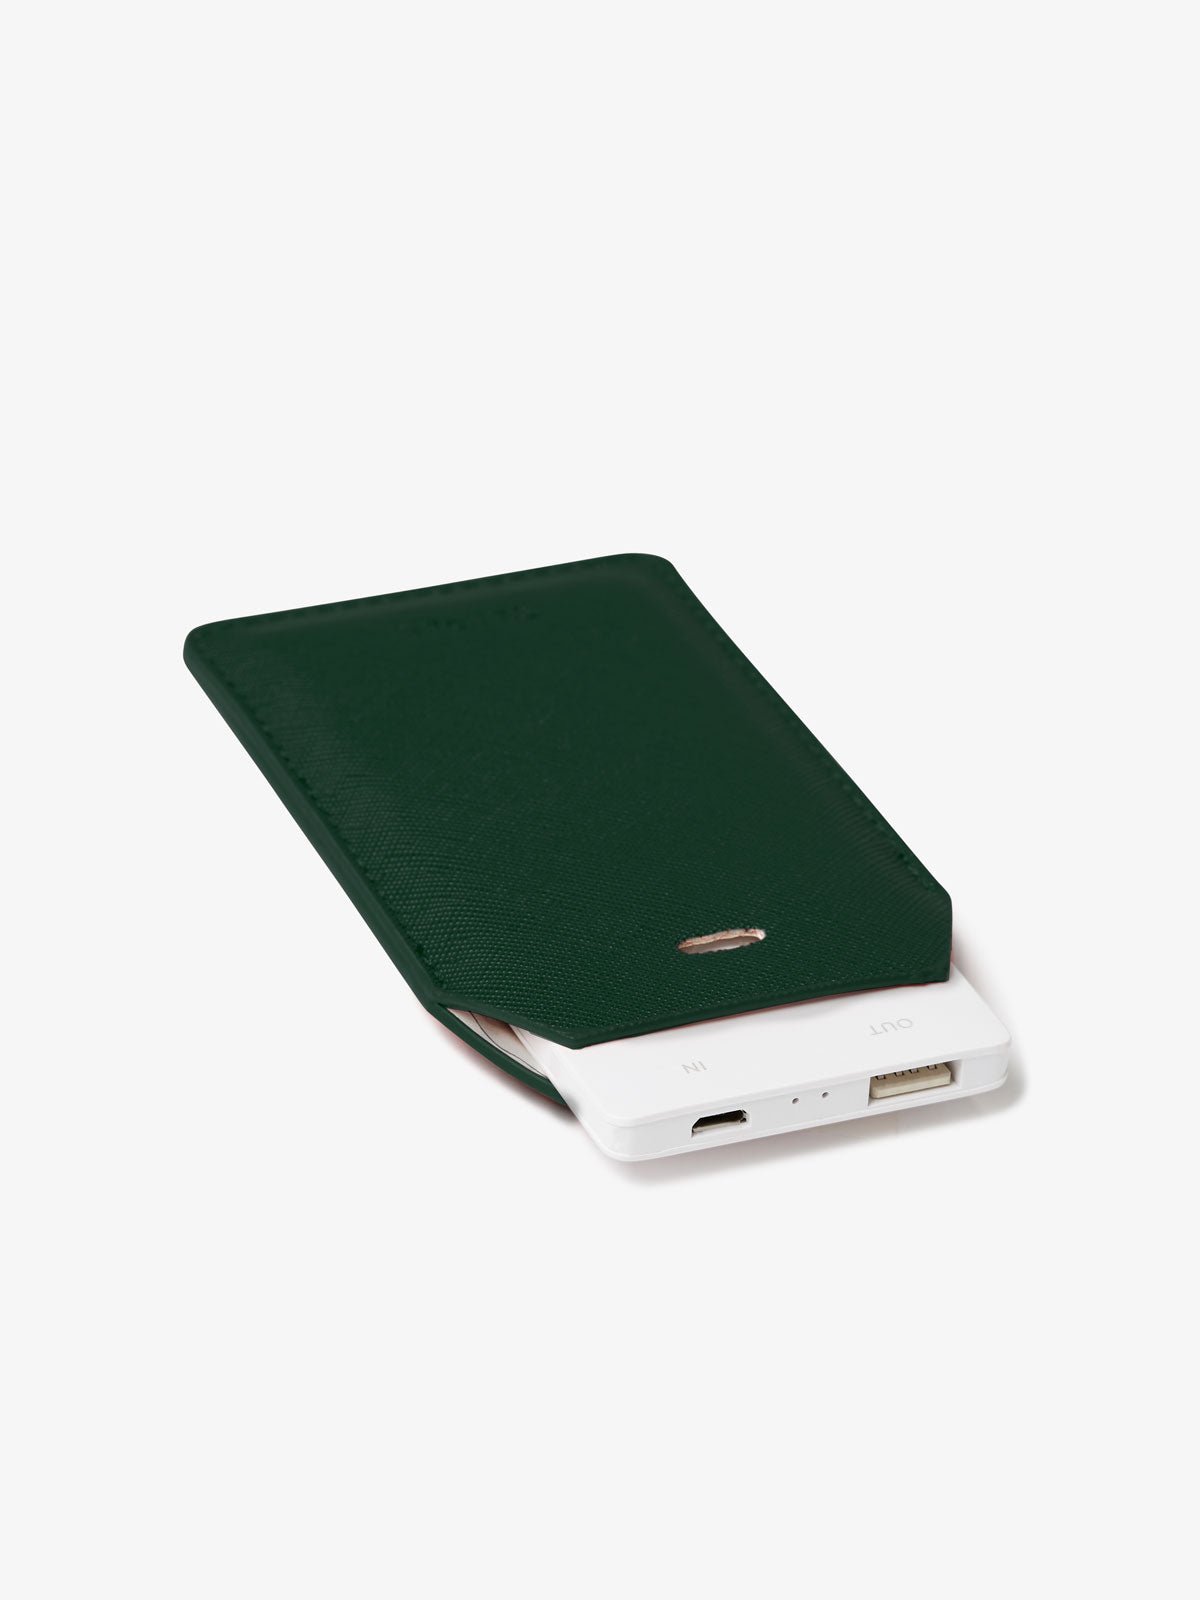 CALPAK luggage tag charger in emerald